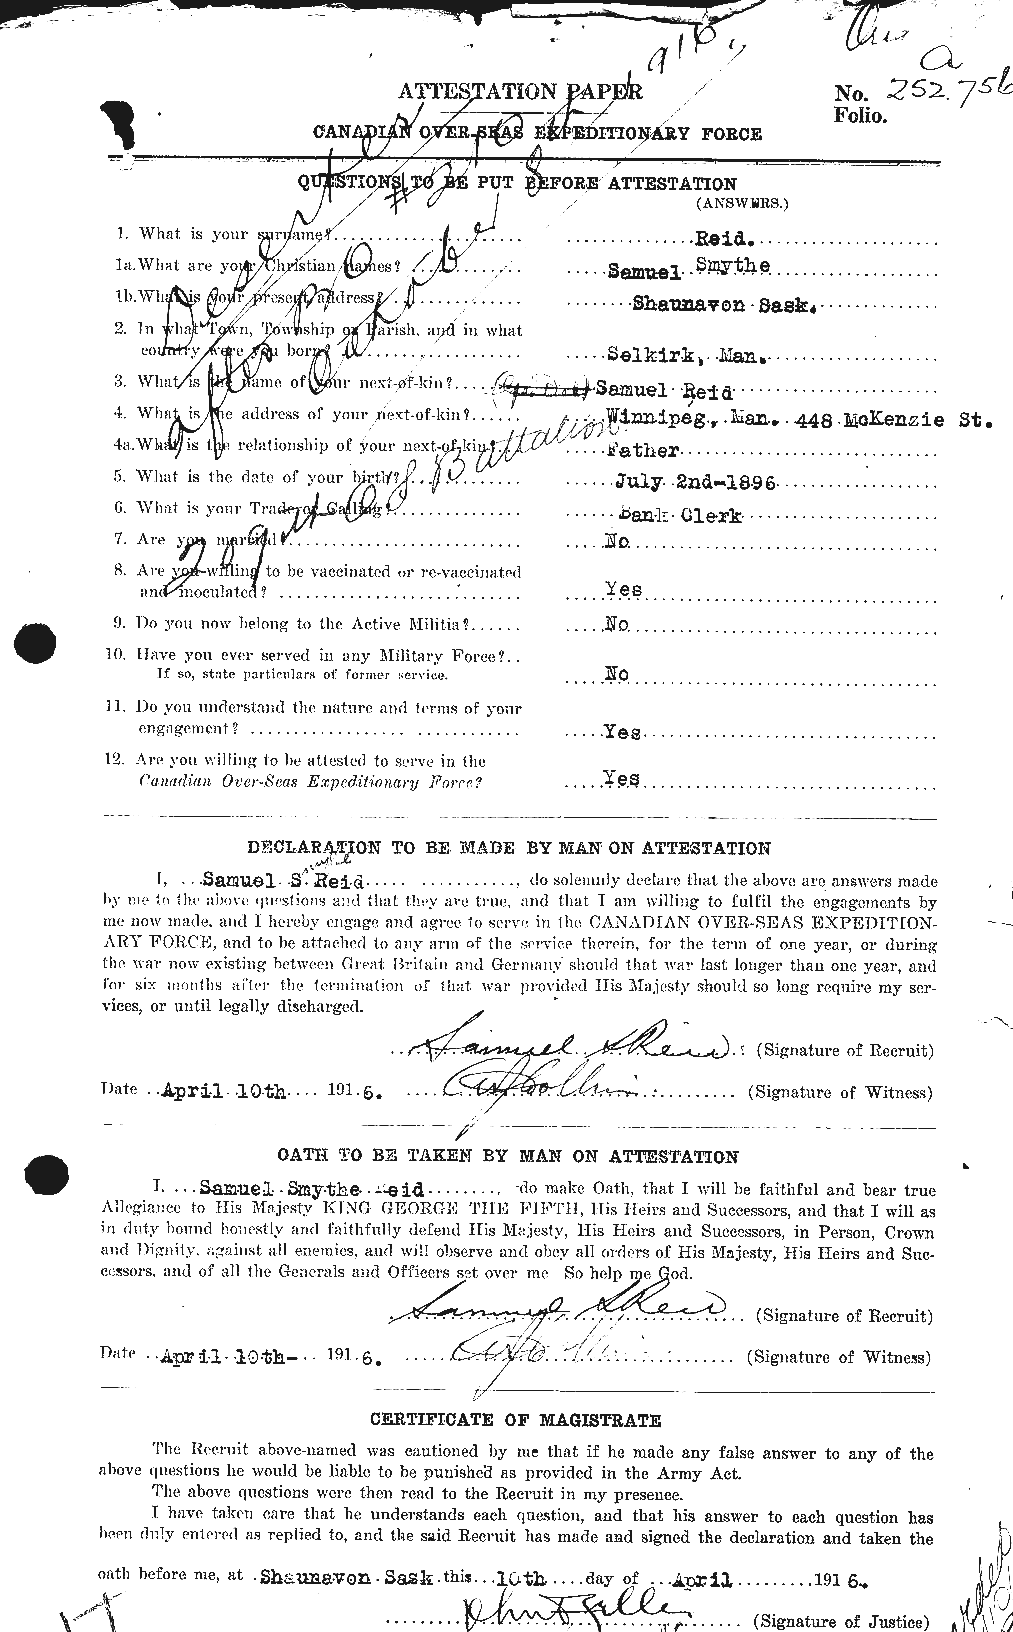 Personnel Records of the First World War - CEF 601954a